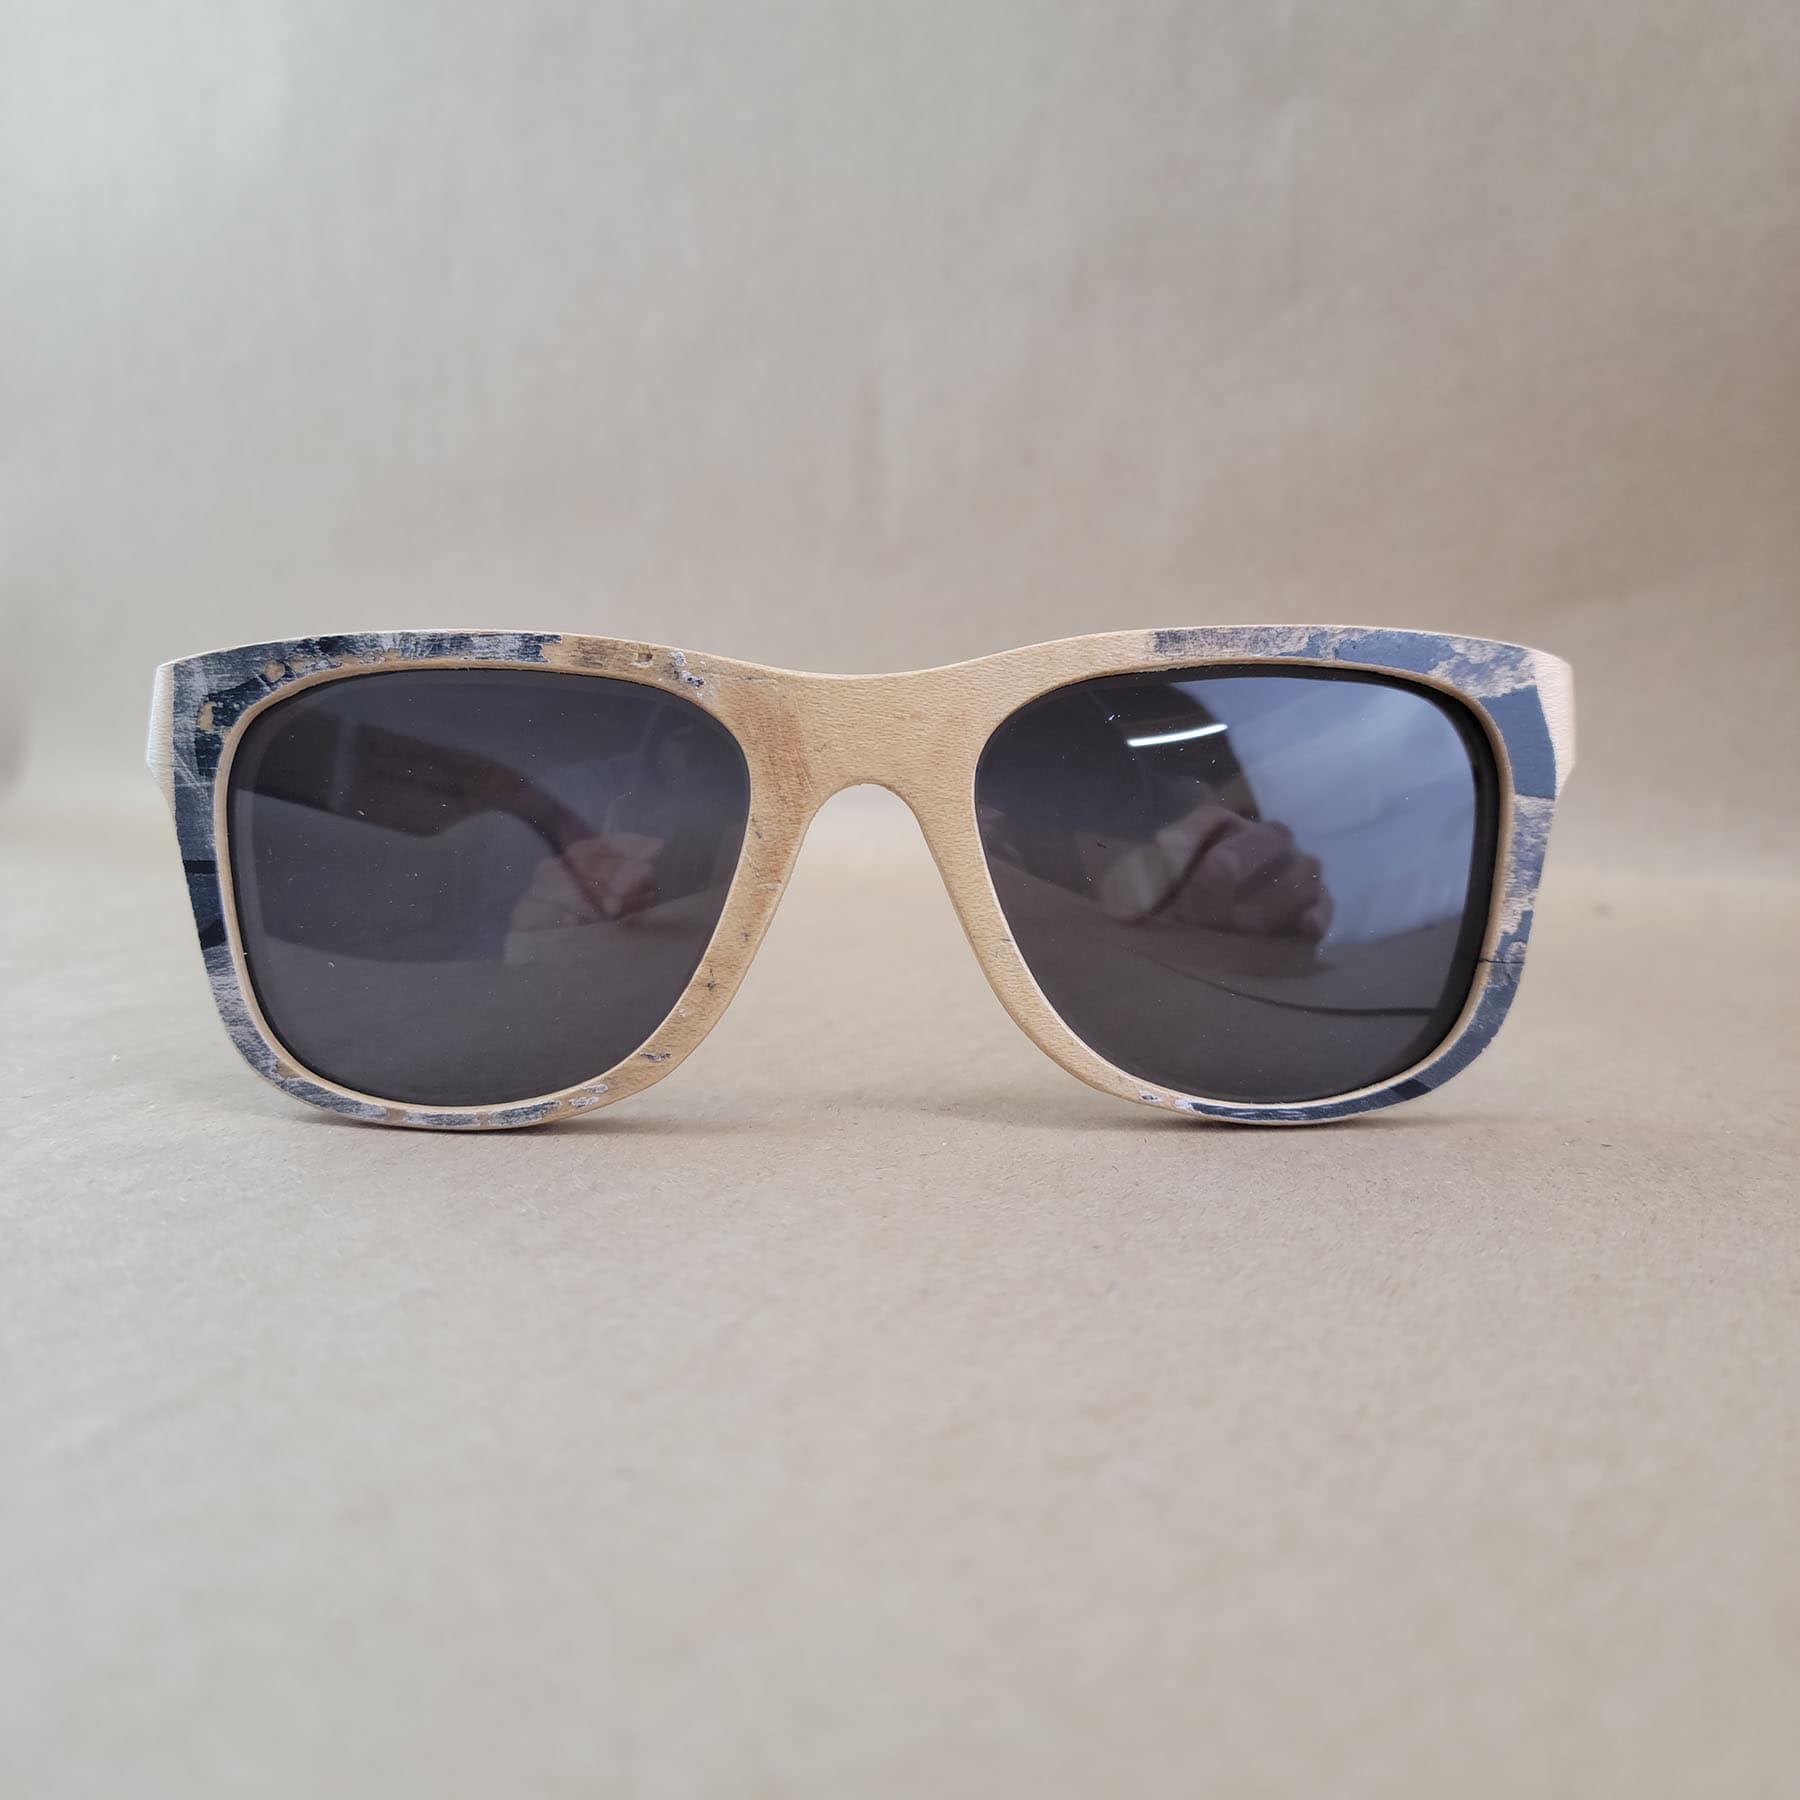 Kilian Martin Collection #1 – 2 of 6 Recycled Skateboard Sunglasses